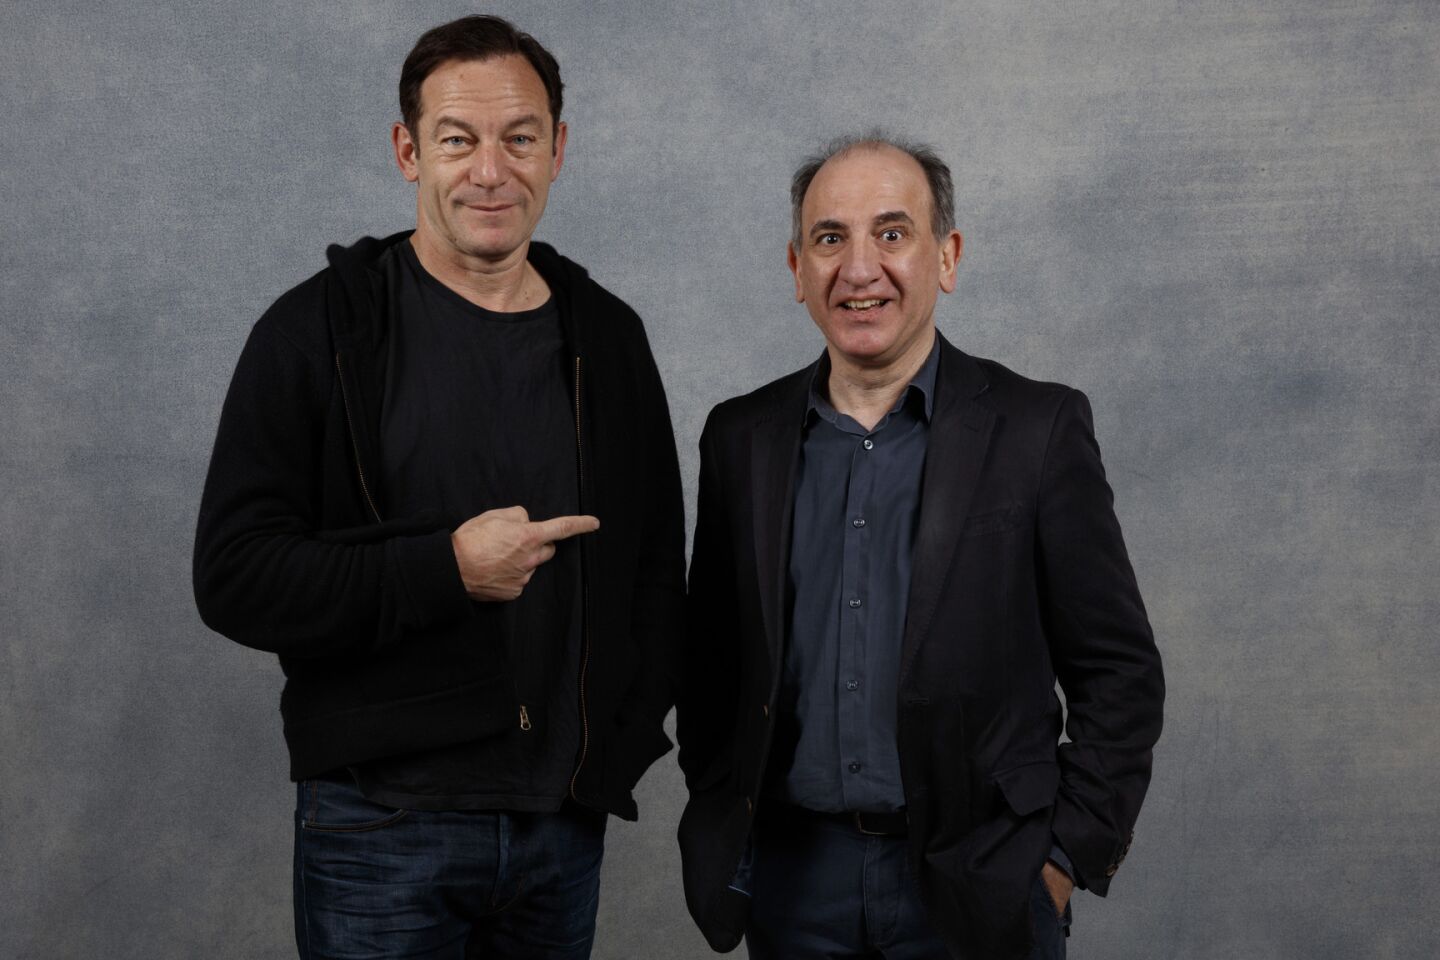 Actor Jason Isaacs and writer/director Armando Iannucci, from the film "The Death of Stalin," photographed in the L.A. Times Studio during the Sundance Film Festival in Park City, Utah, Jan. 20, 2018.